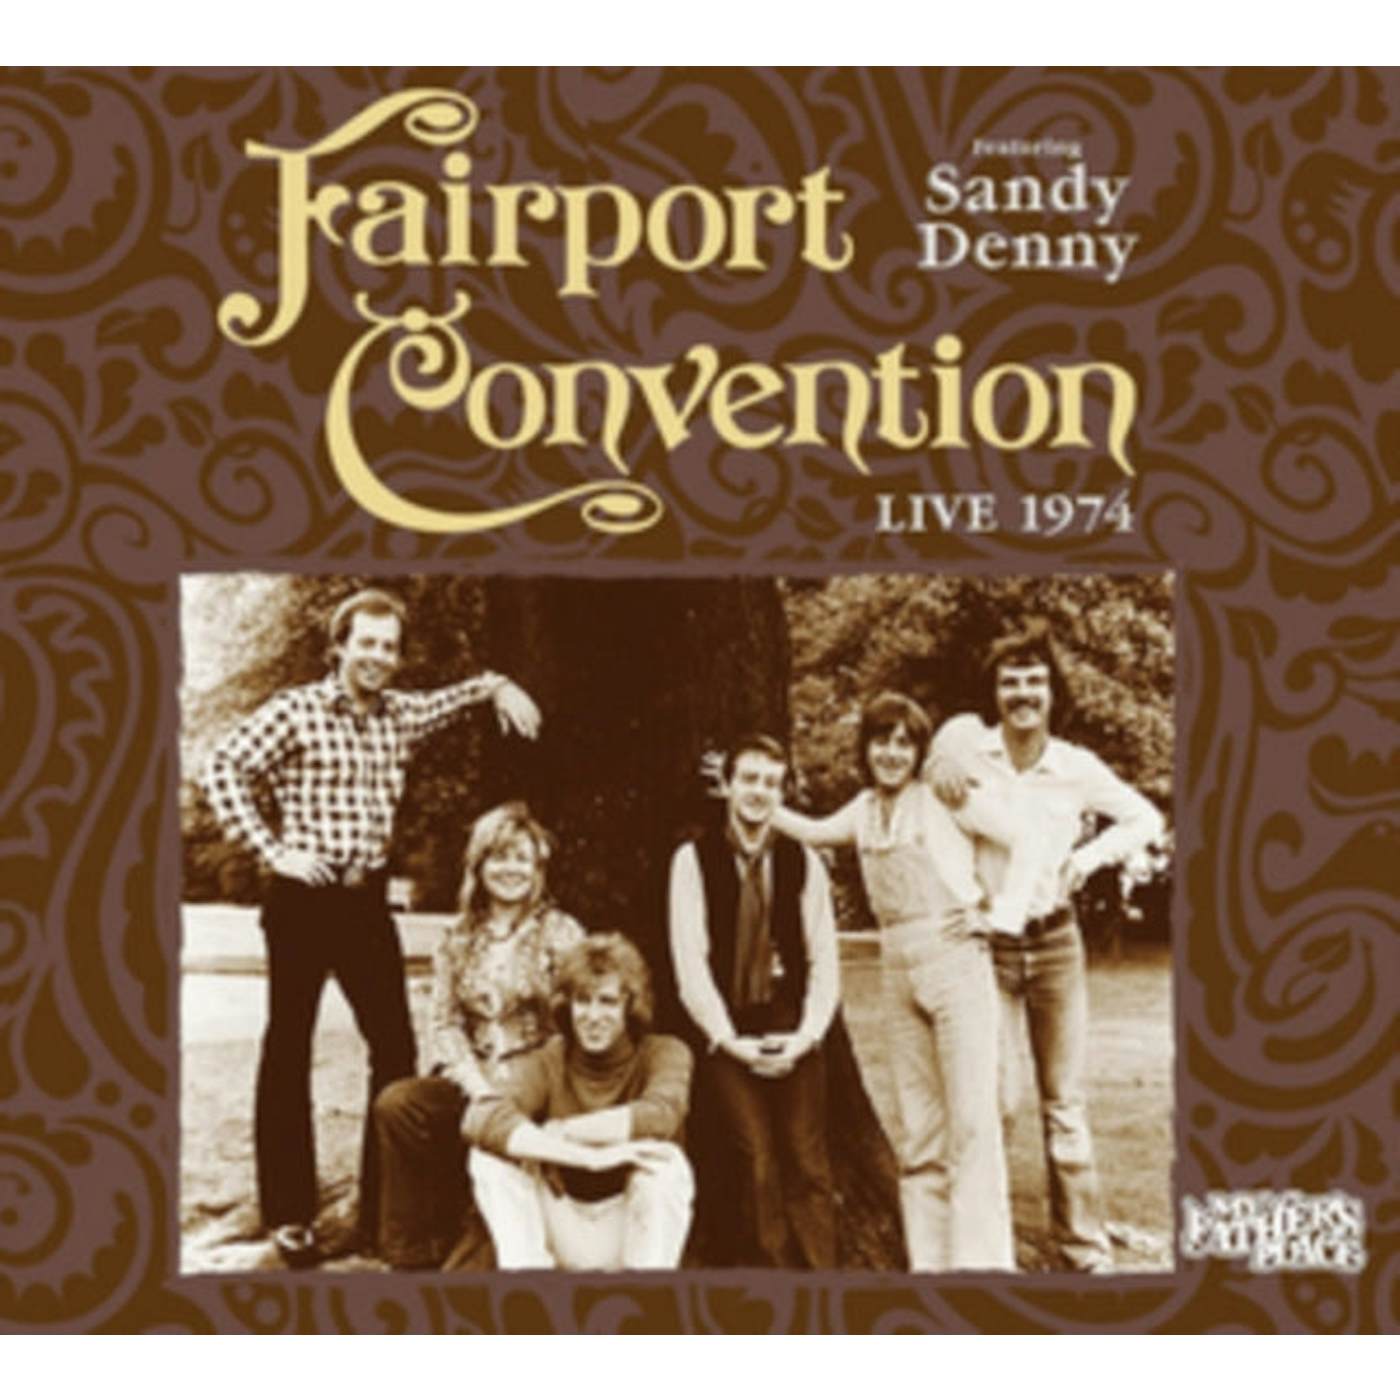 Fairport Convention CD - Live At My Fathers Place